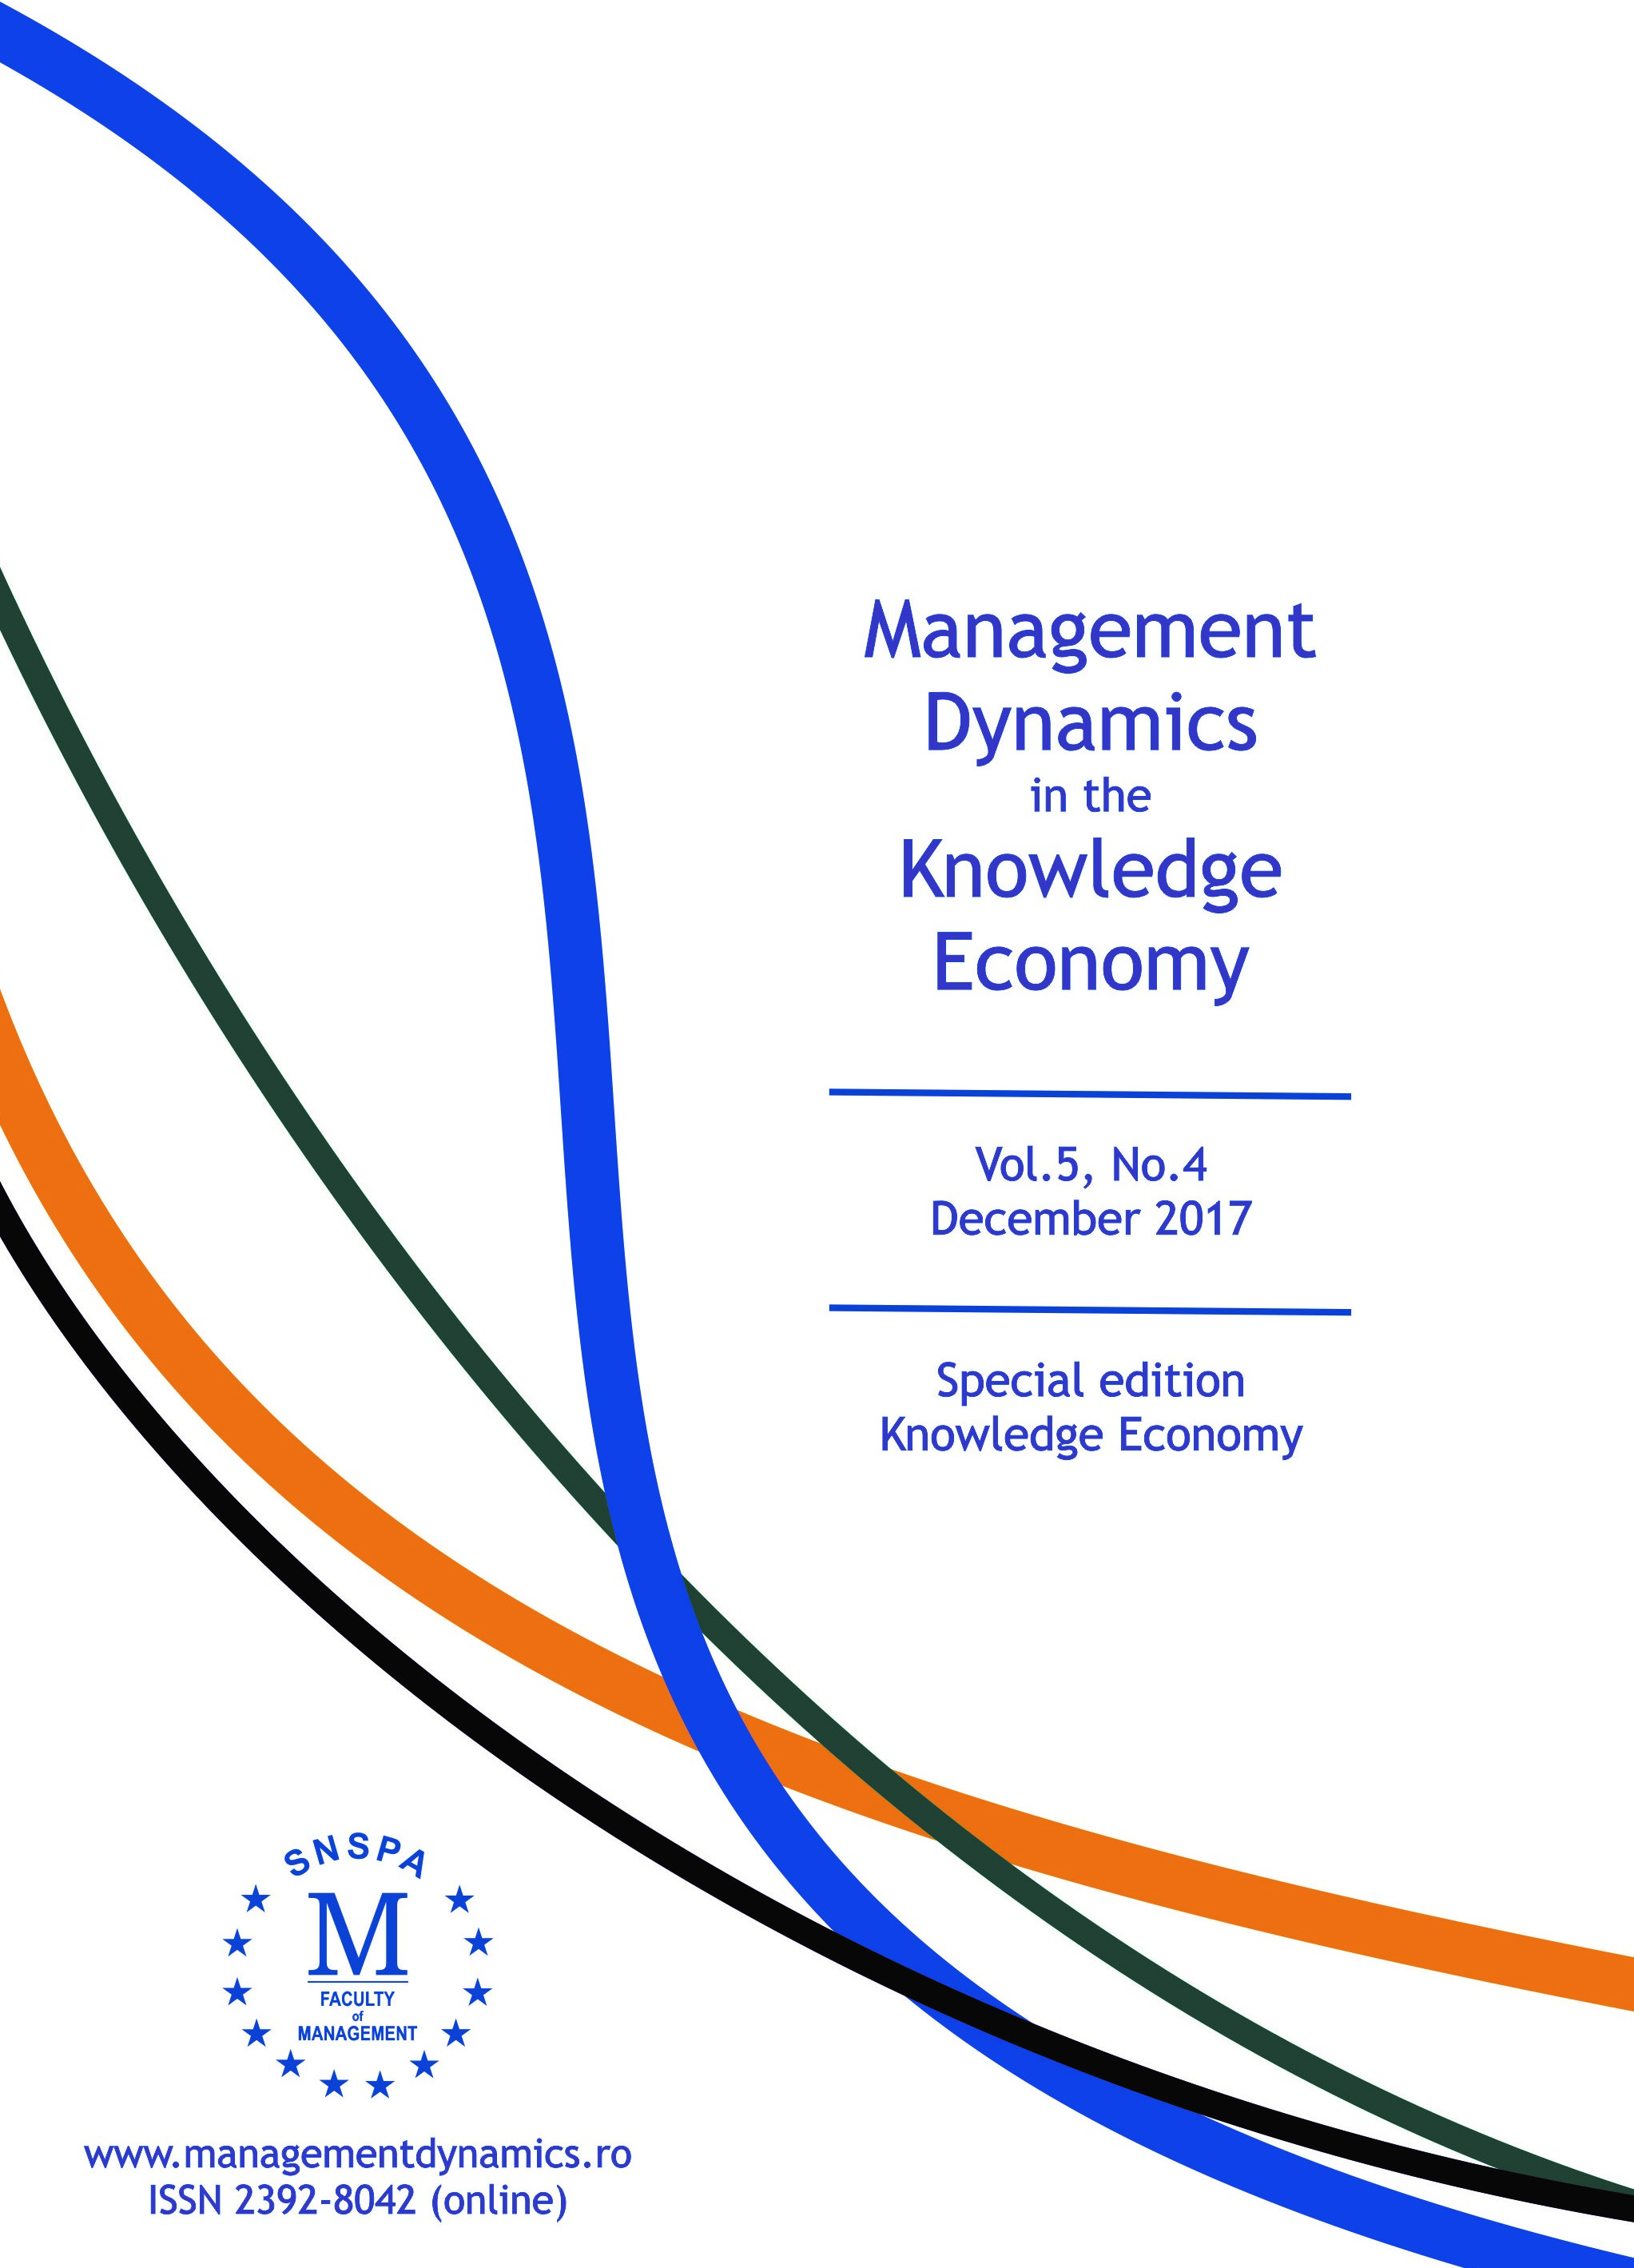 Rethinking Public Organizations as Knowledge-Oriented and Technology-Driven Organization